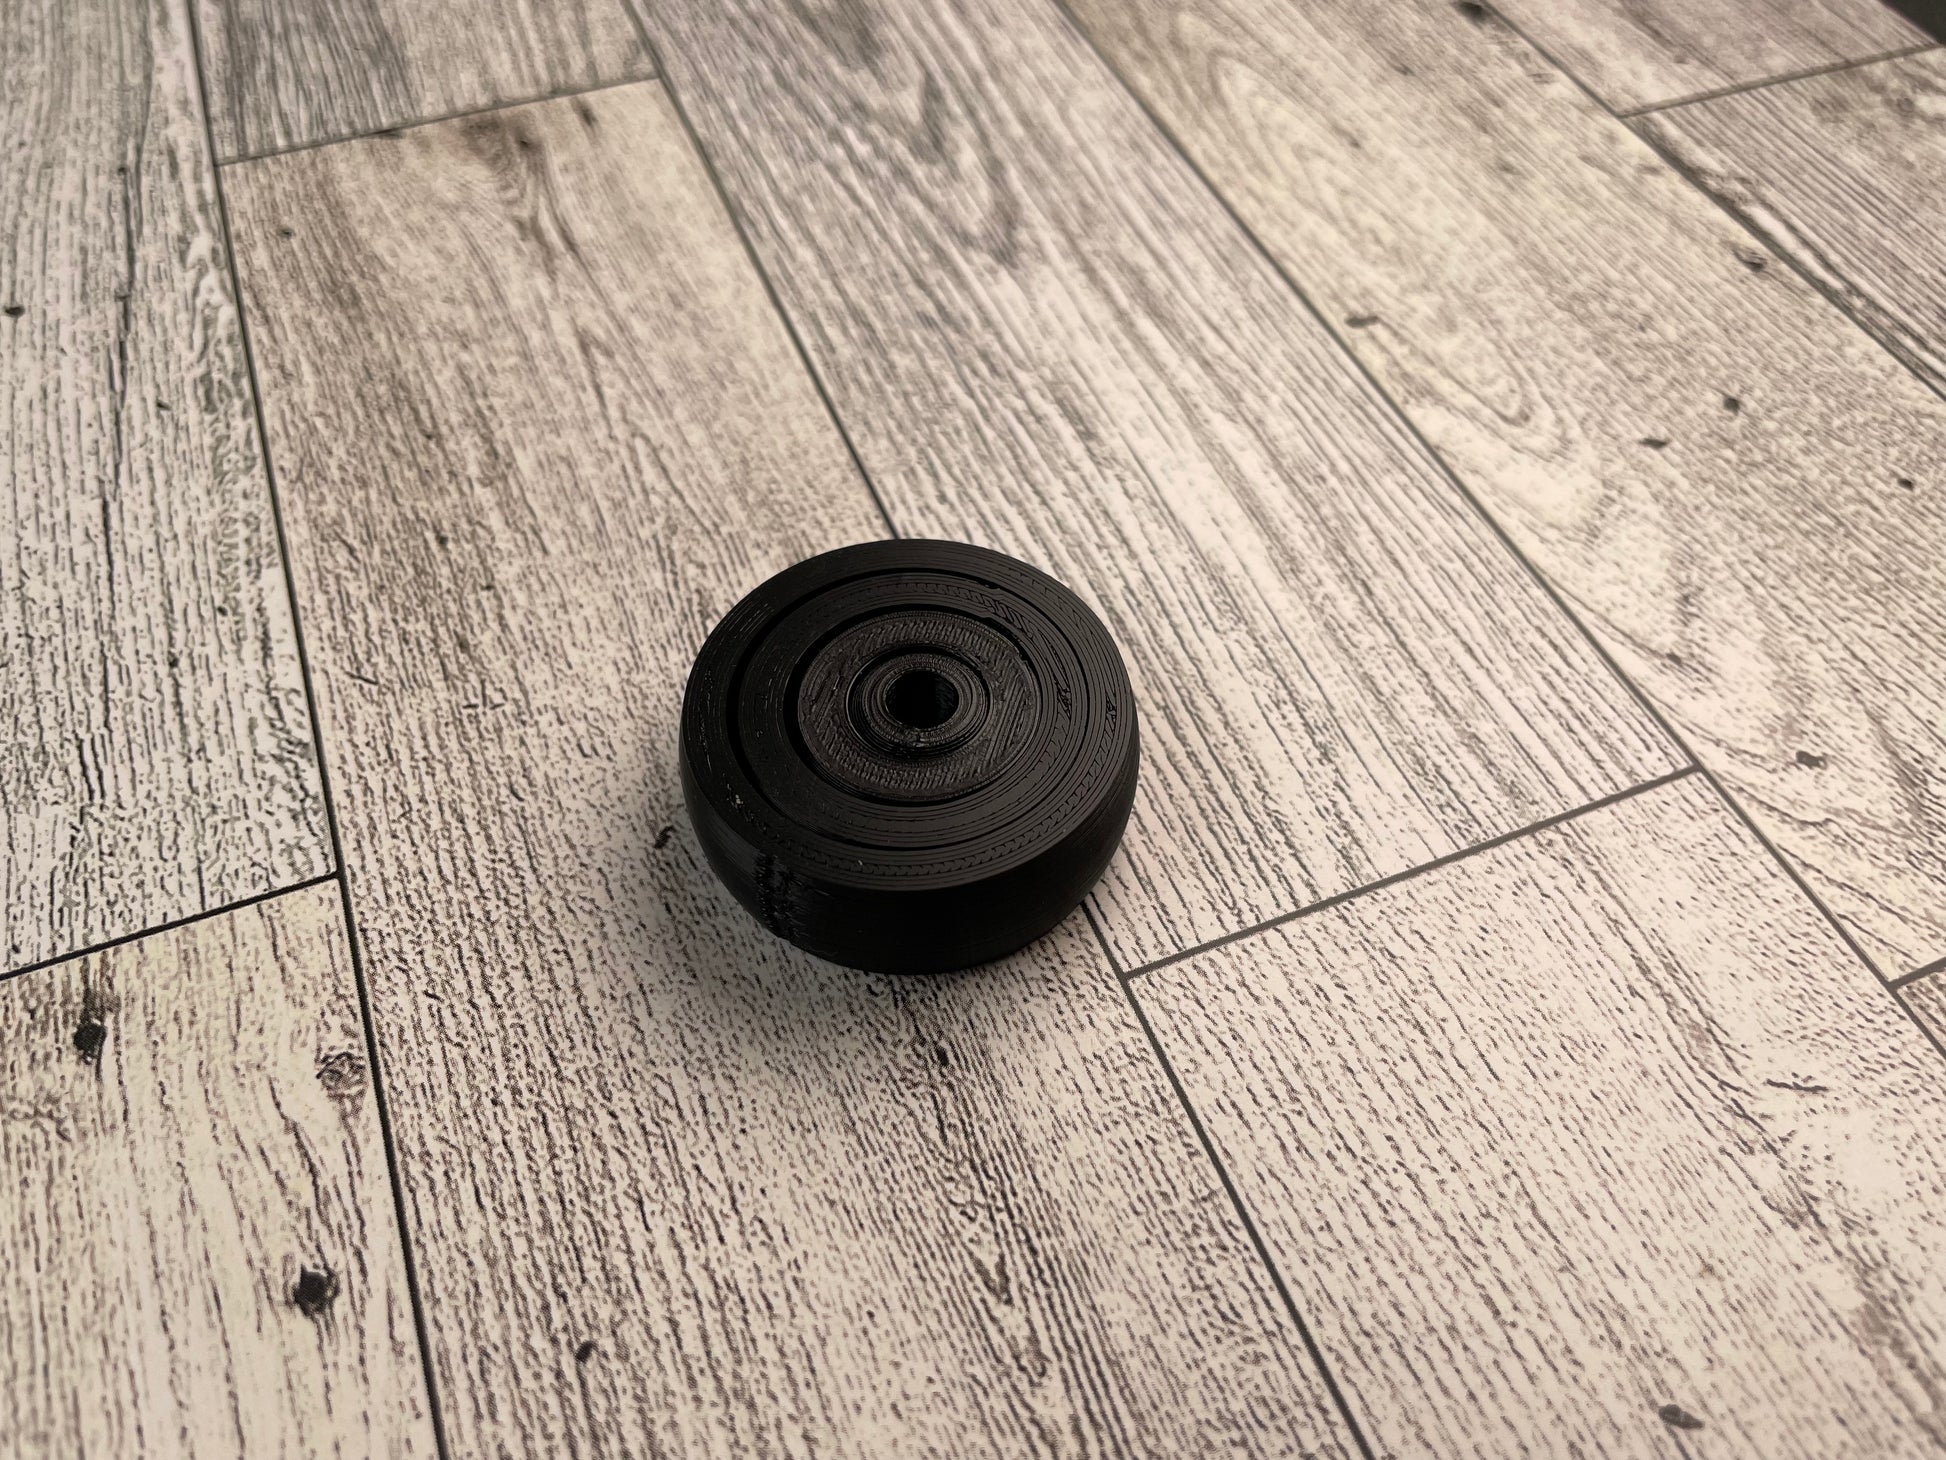 A small 3D printed gyro fidget that is about 1.5 inches in diameter on a wood background. It has four nested circles that can be spun and twirled. It is printed in black filament.